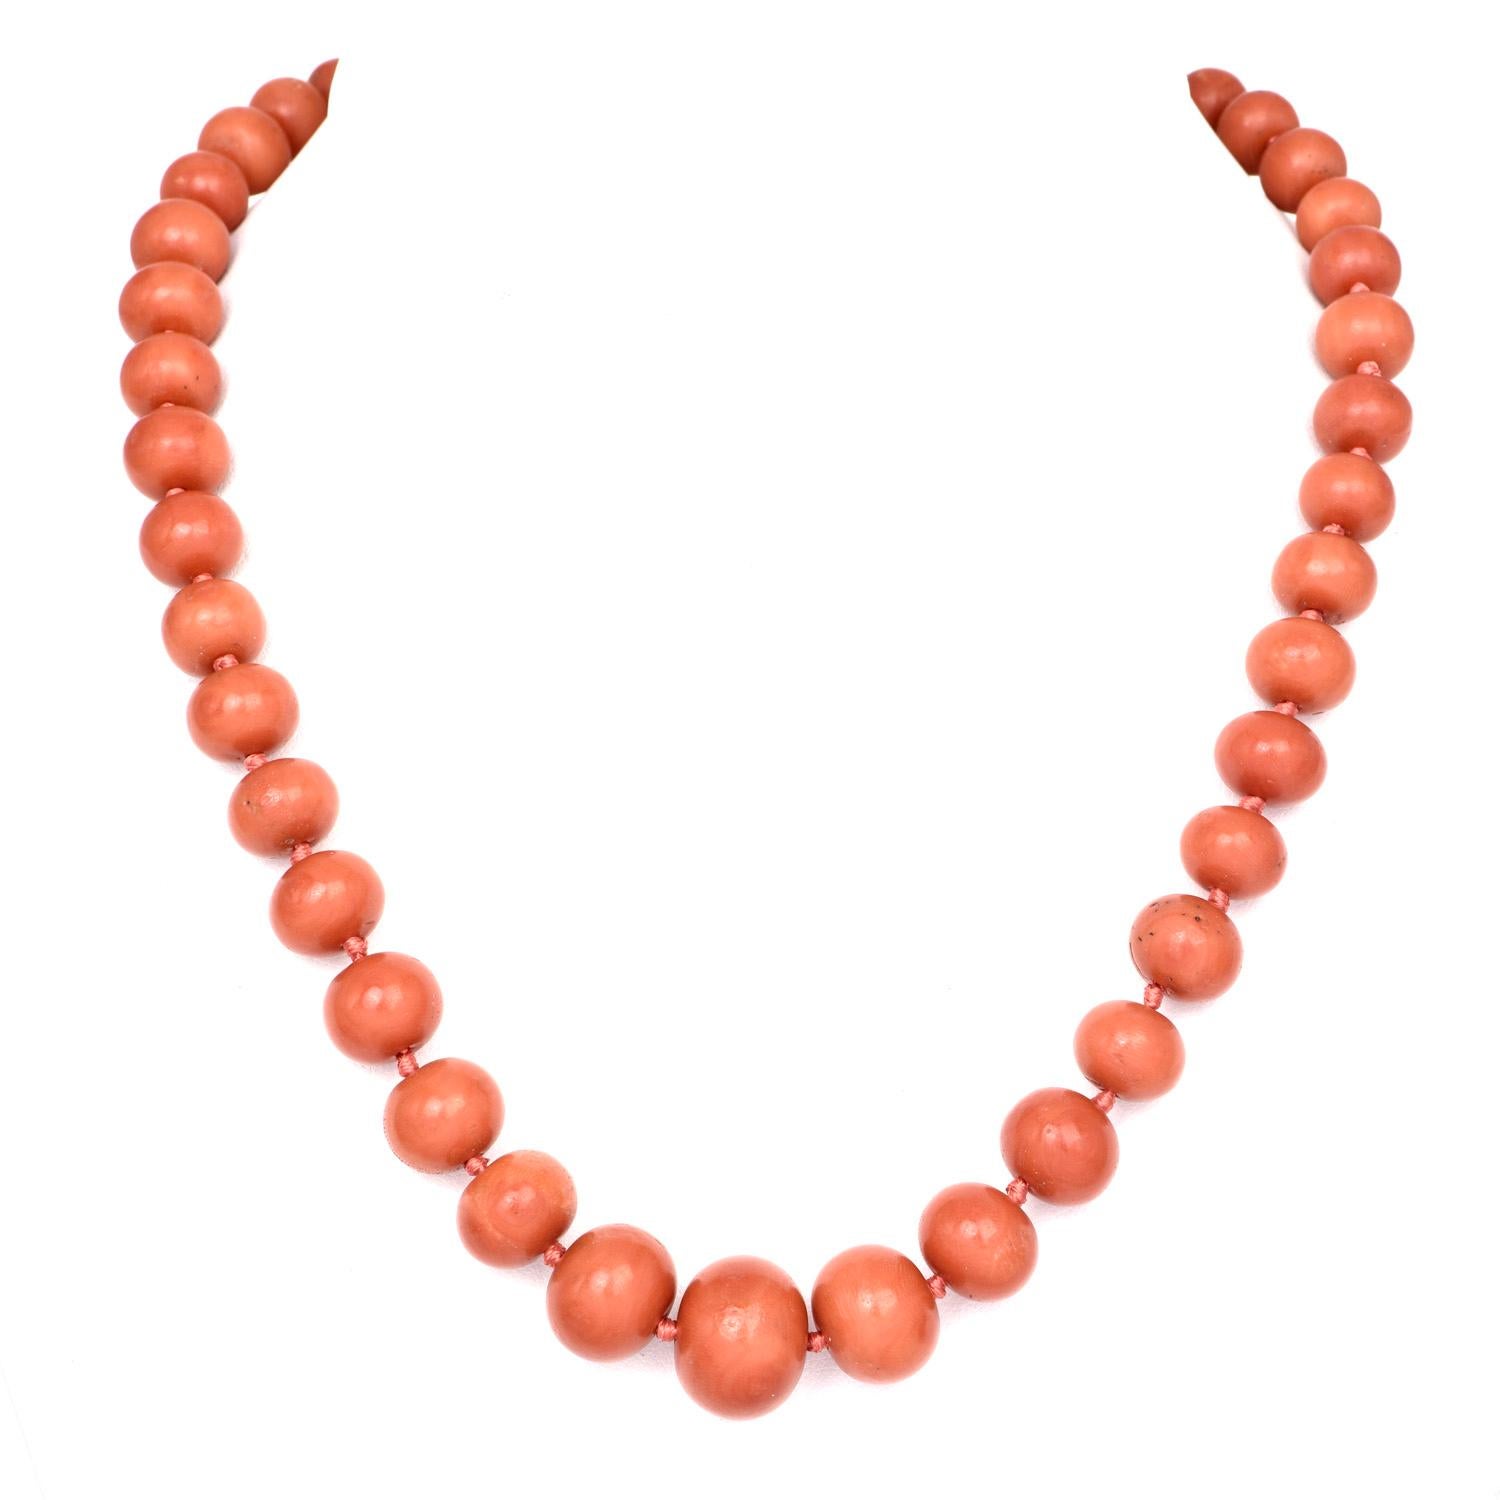 Buy Vintage Coral Pearl Necklace Made of 101 Coral Pearls, Pre-owned  Necklace, Antique Jewelry Maison Mohs Online in India - Etsy